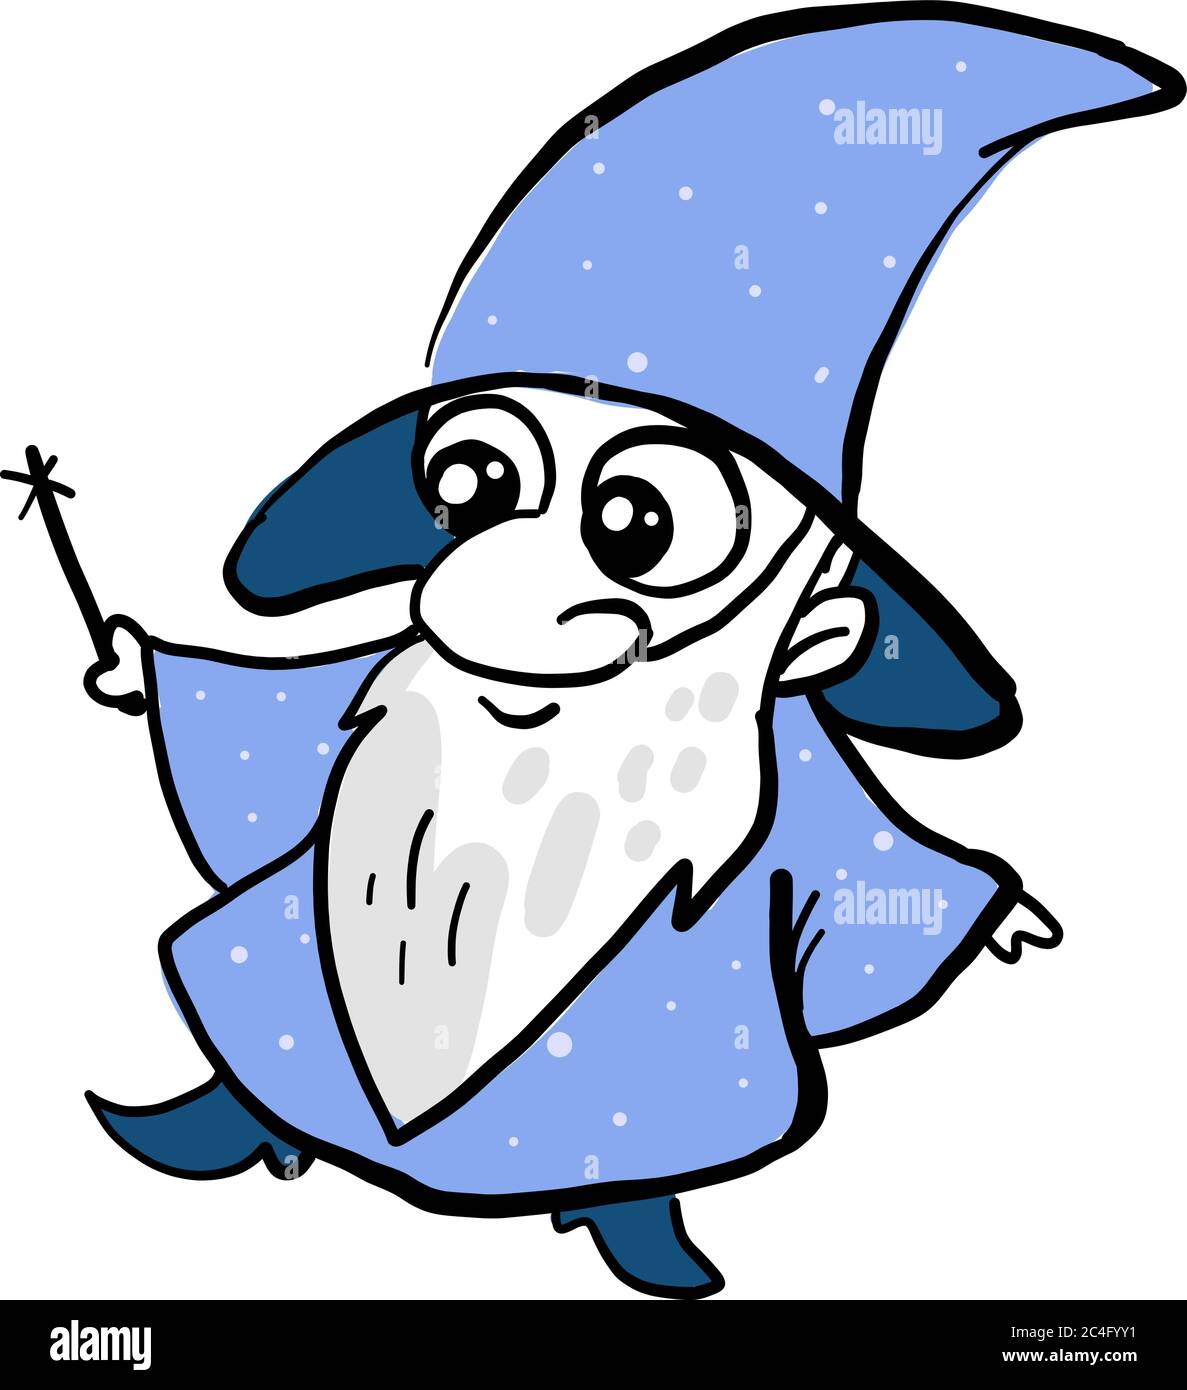 Small wizard, illustration, vector on white background Stock Vector